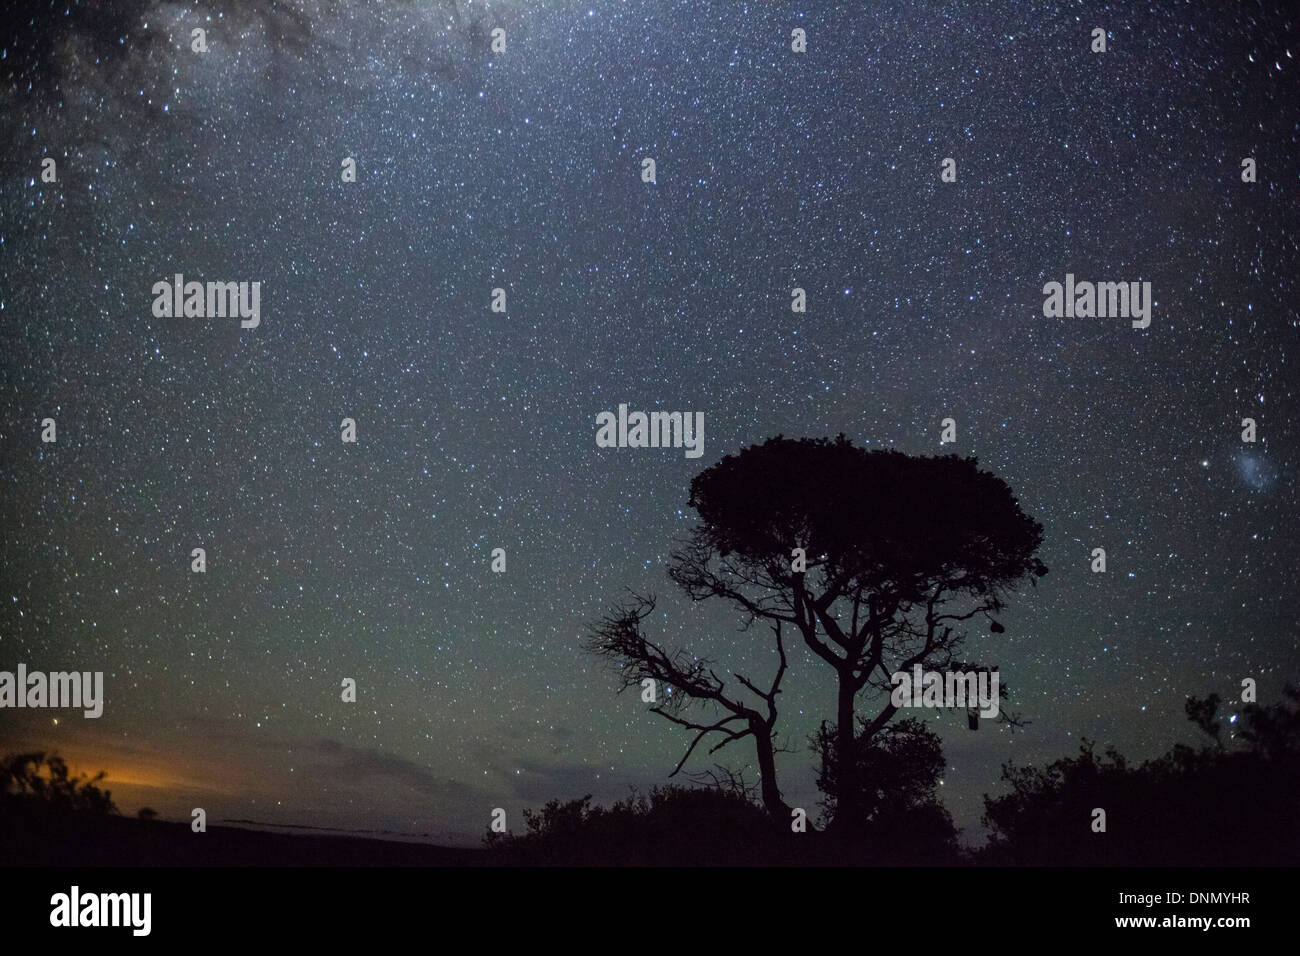 Starry sky and single tree, De Hoop Nature Reserve, Western Cape, South Africa. Stock Photo